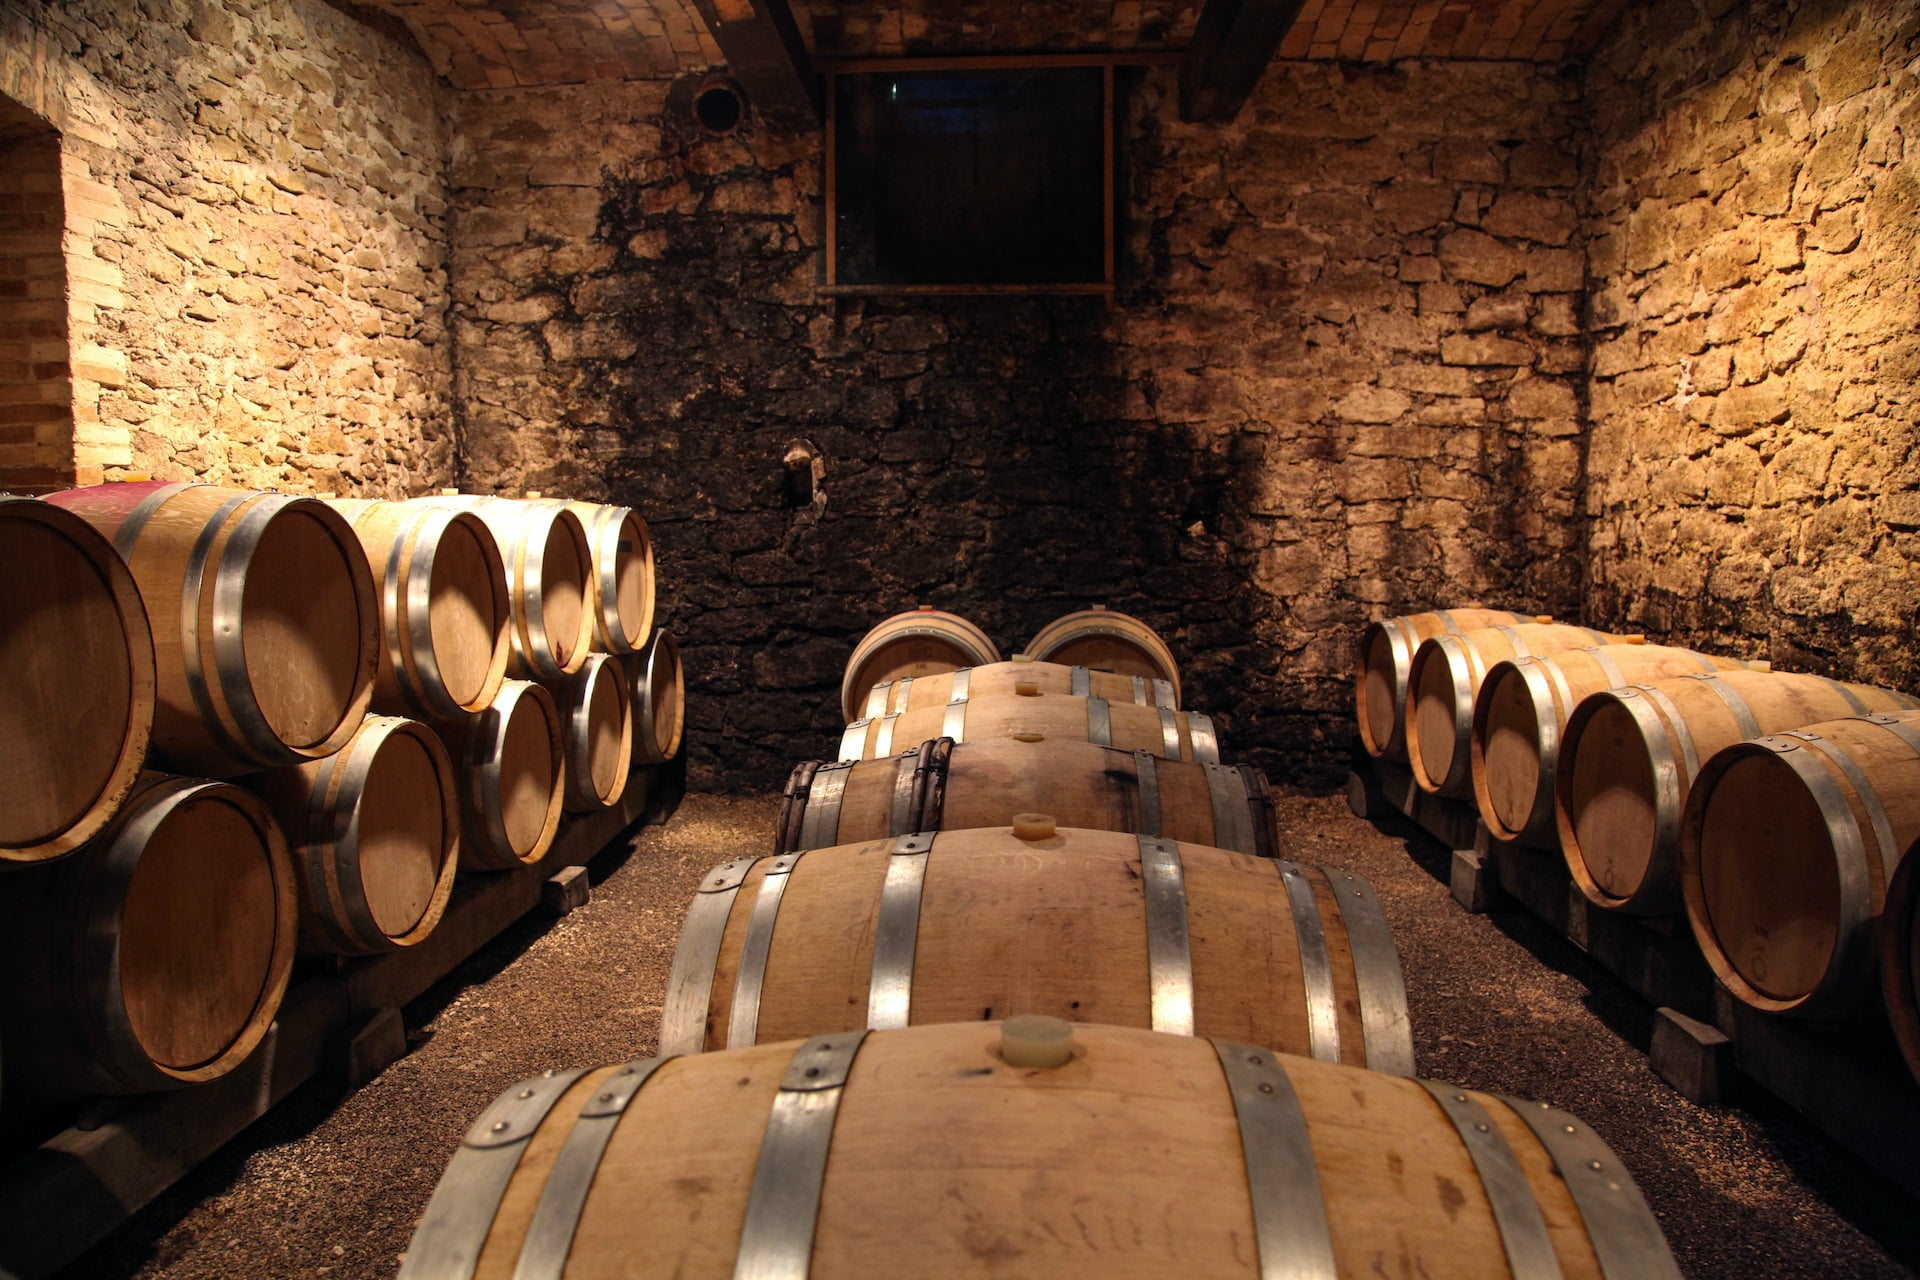 Depicts several barrels aging wine or whiskey in a cellar. Used as a cover image for an overview of Vint.